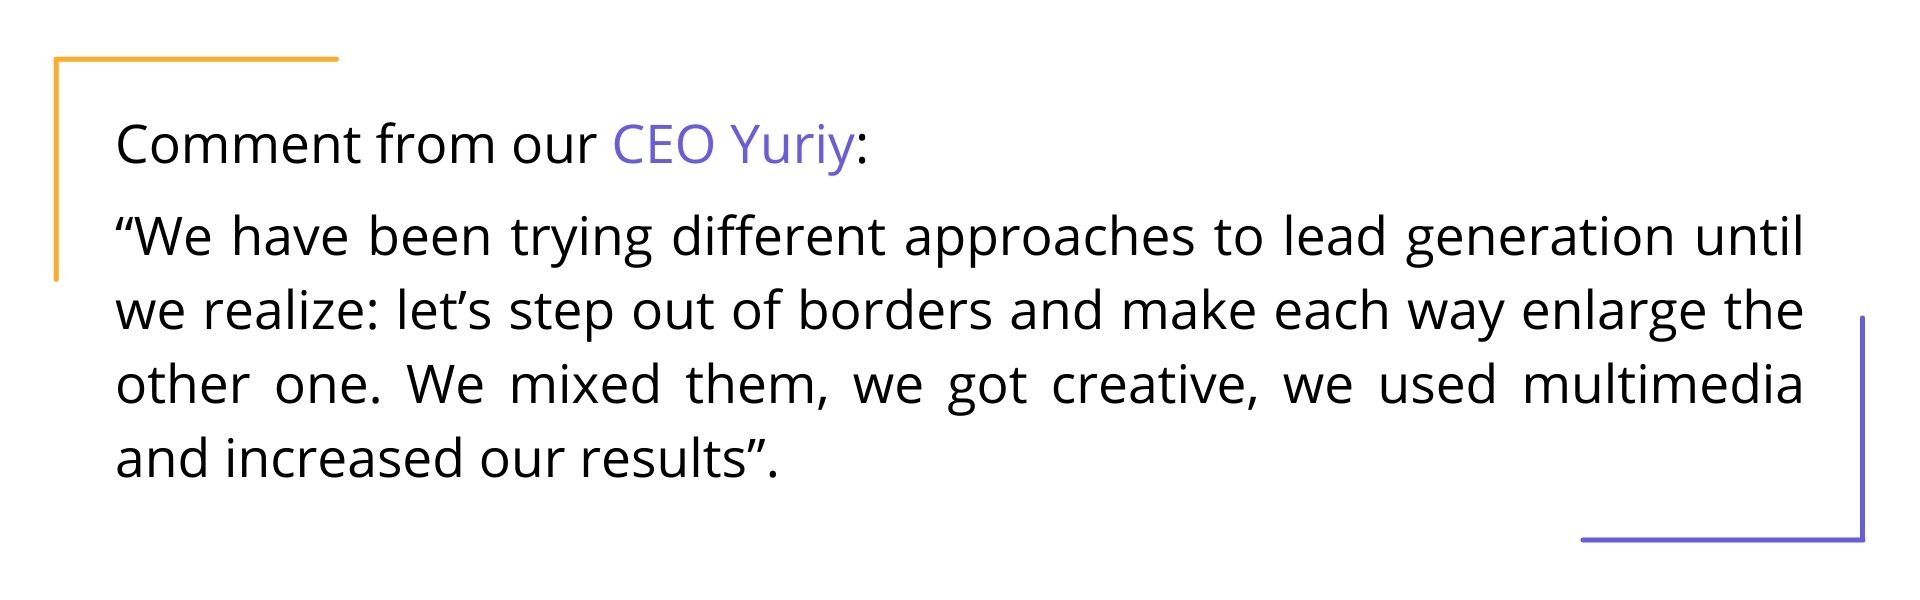 Comment from our CEO Yuriy